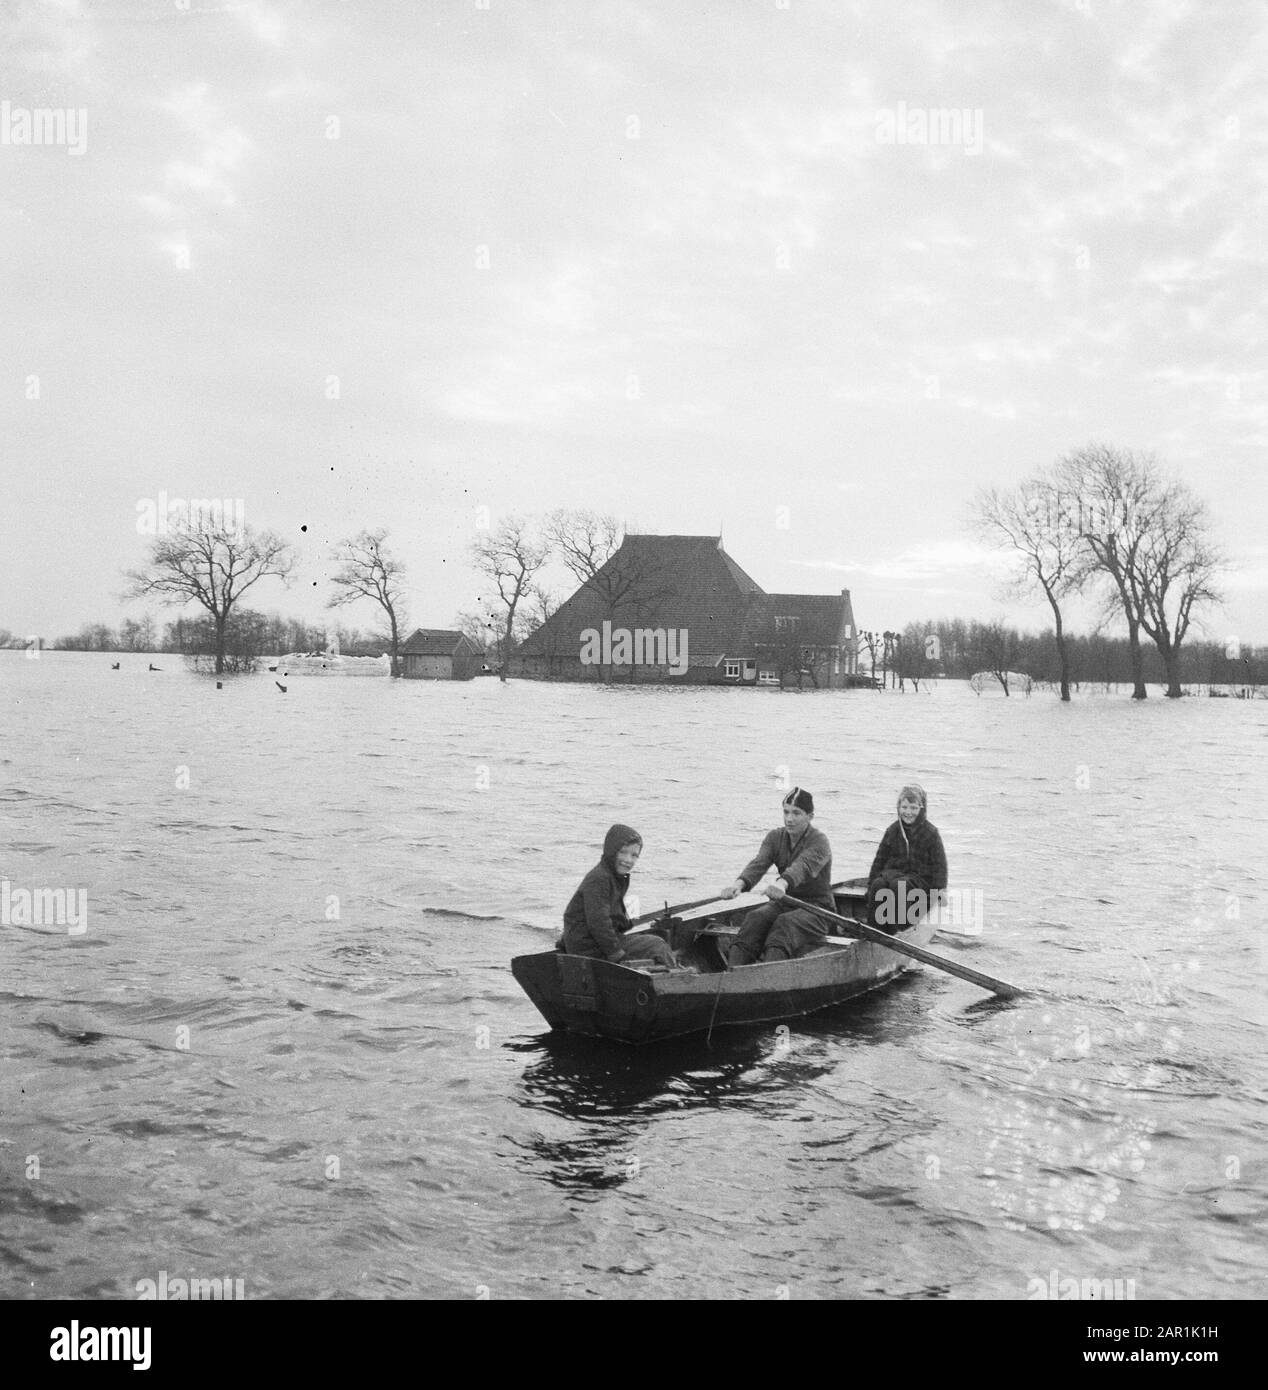 Flood in Friesland, family Oeneman in Alde Ouer near Joure must evacuate; children in a rowing boat on their way to a farm Date: 19 December 1965 Location: Friesland, Joure Keywords: farms, children, floods, rowing boats, waterlogging Stock Photo